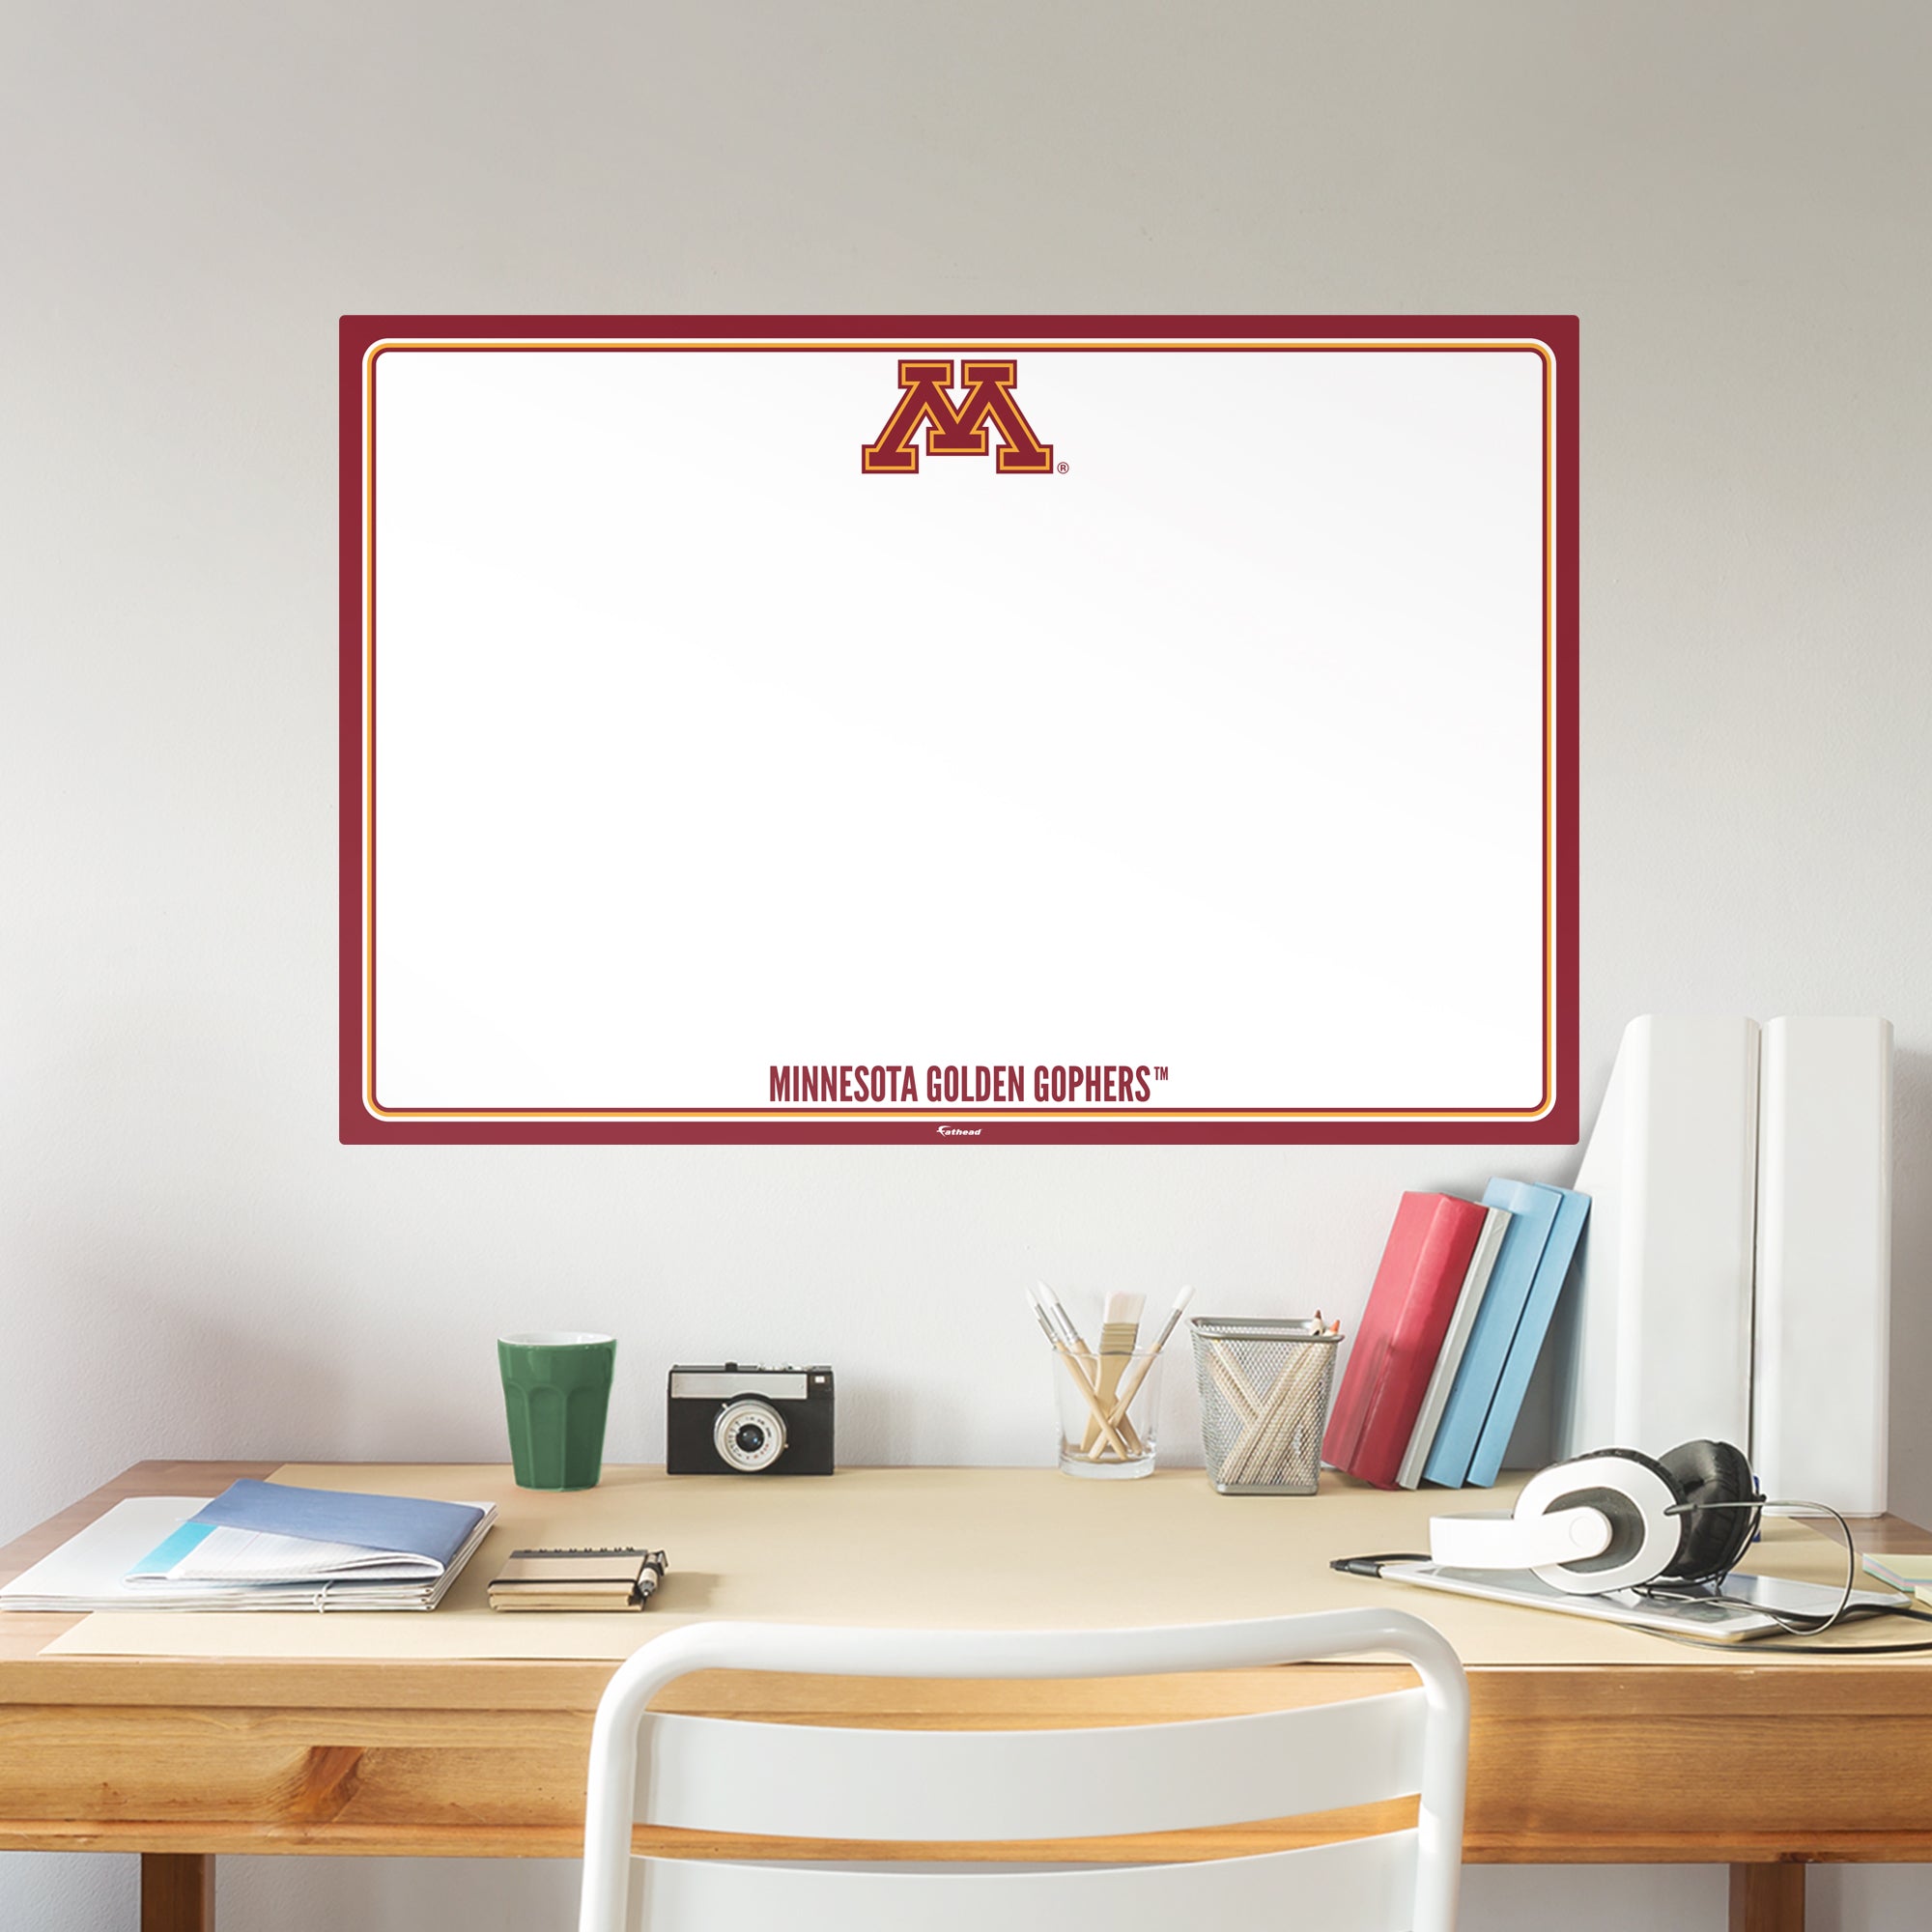 Minnesota Golden Gophers: Dry Erase Whiteboard - X-Large Officially Licensed NCAA Removable Wall Decal XL by Fathead | Vinyl